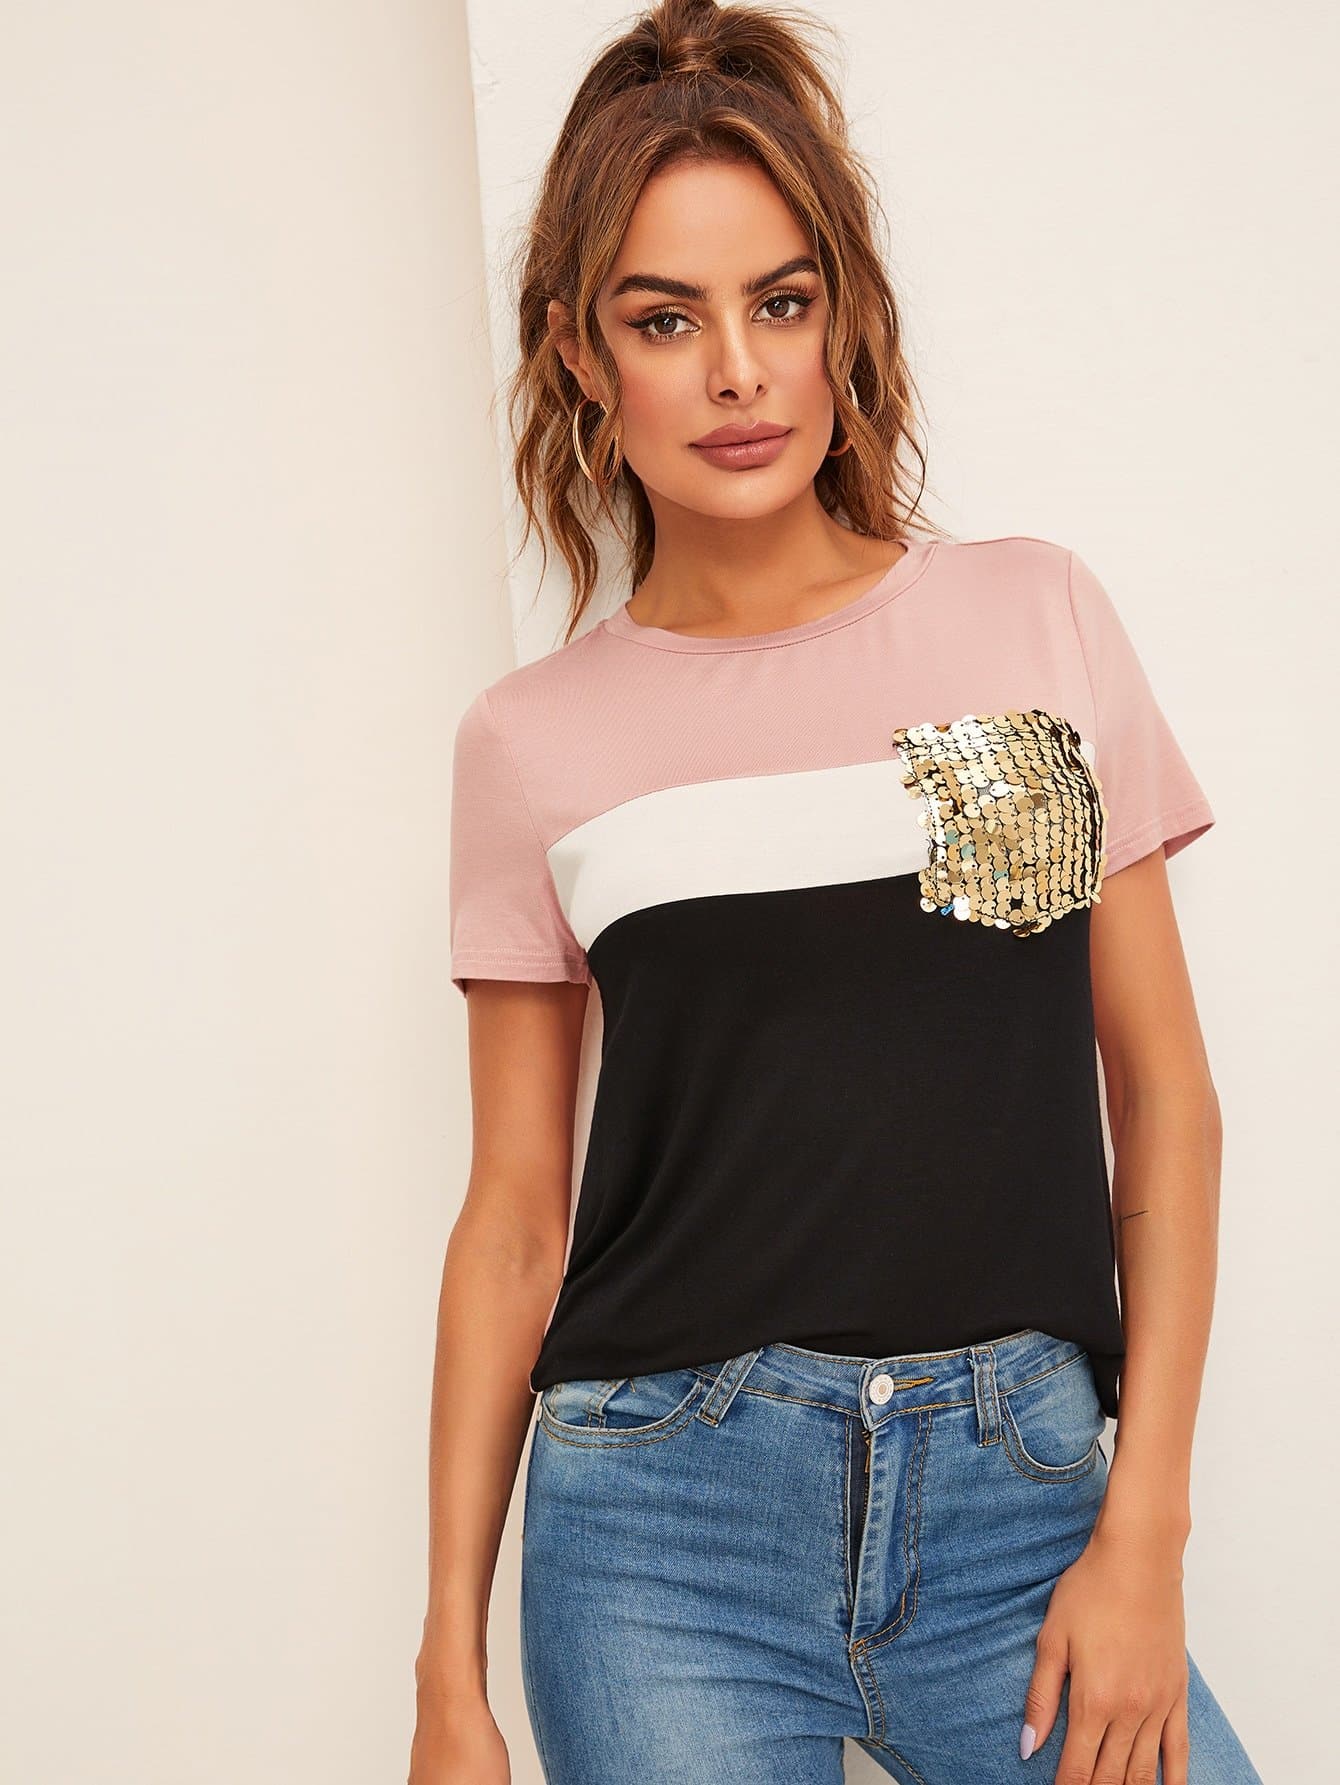 Round Neck Cut and Sew Sequin Pocket Tee Top